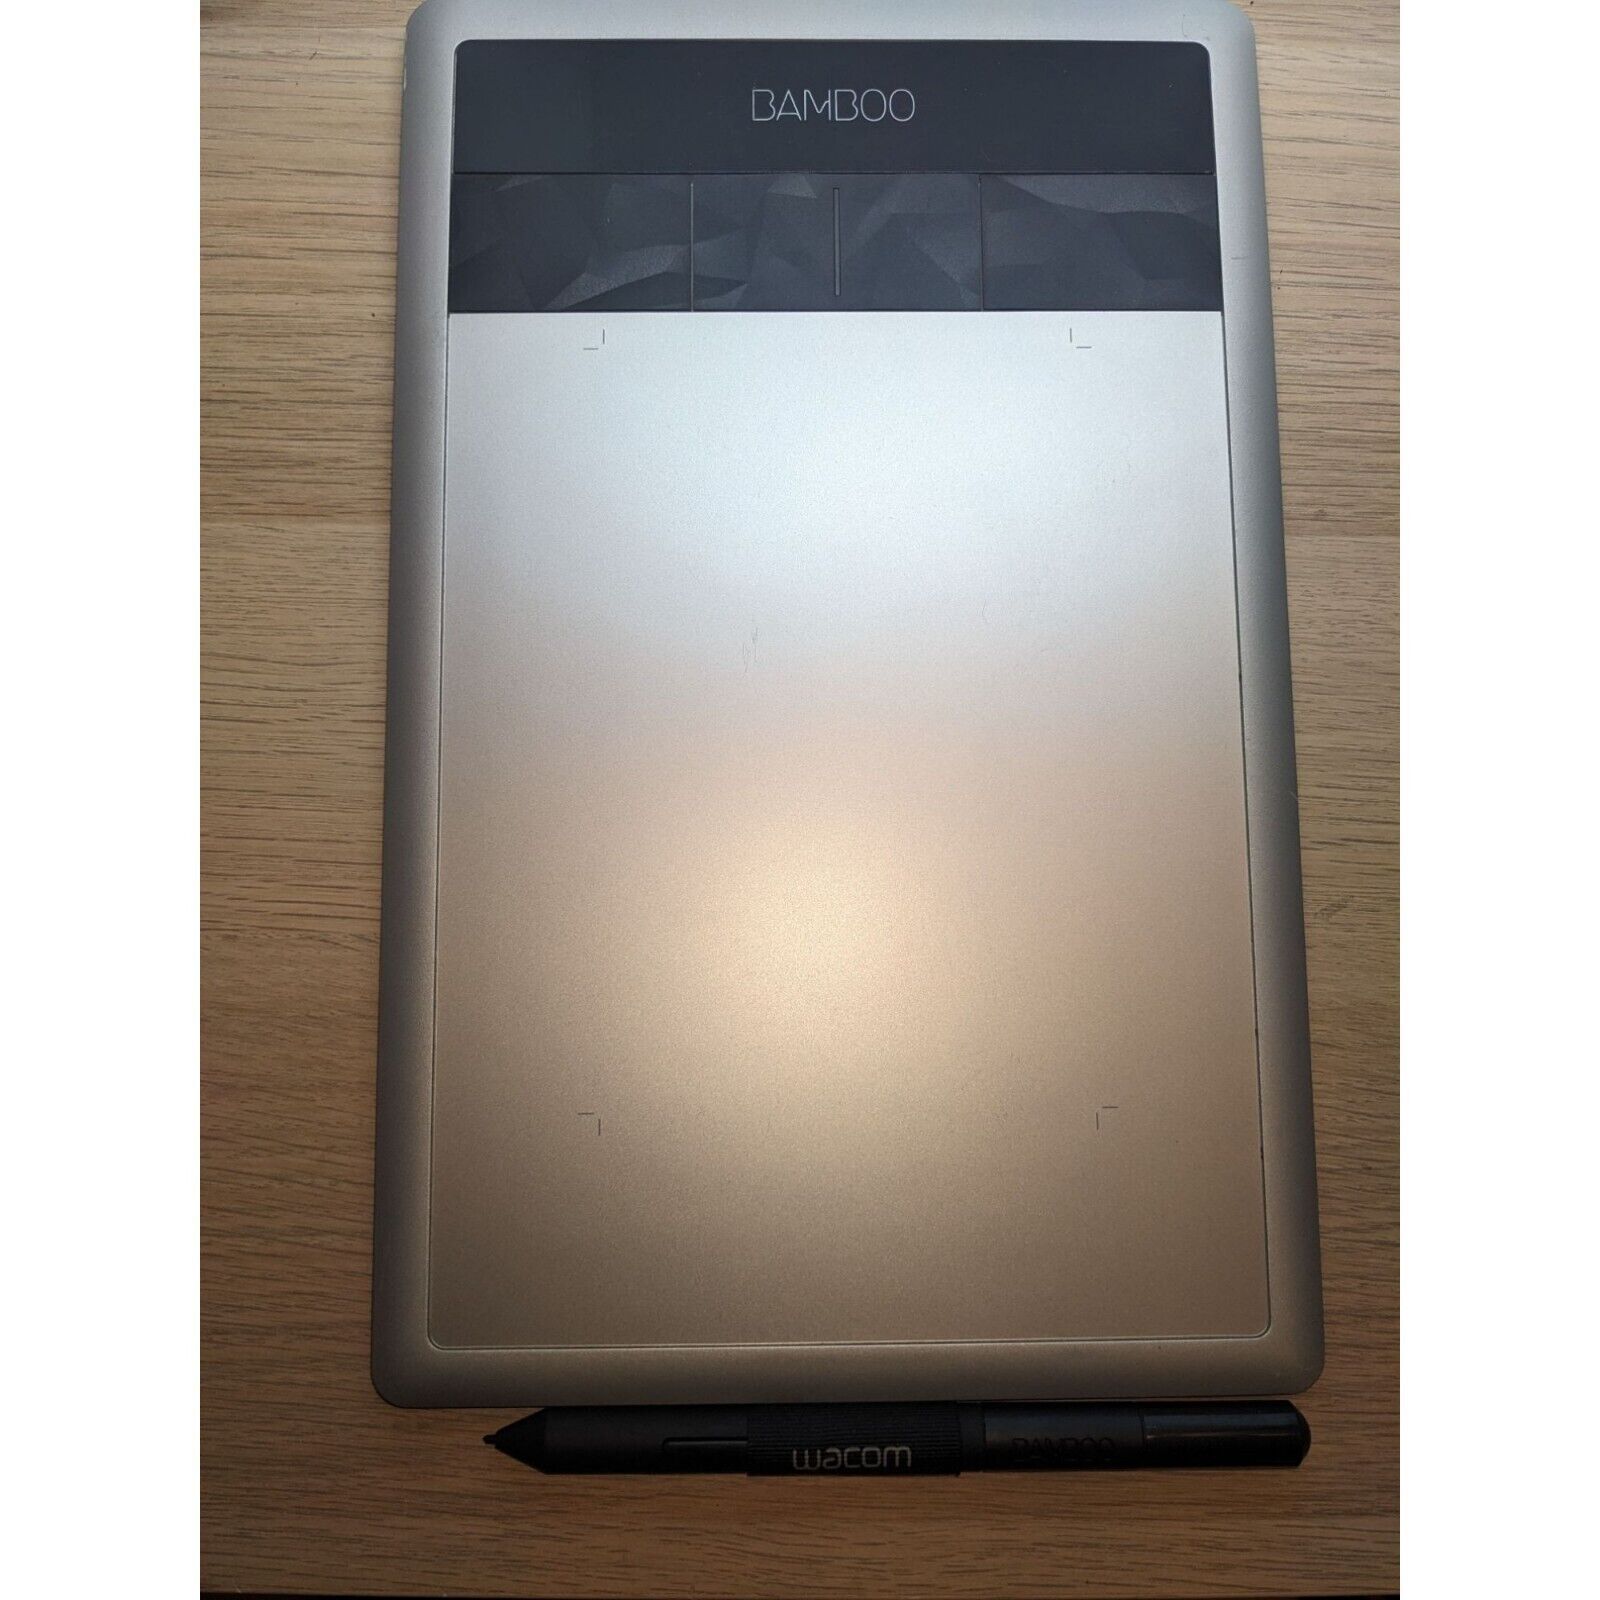 WACOM CTH470 Bamboo Capture Pen and Touch Tablet With Wireless Module Battery